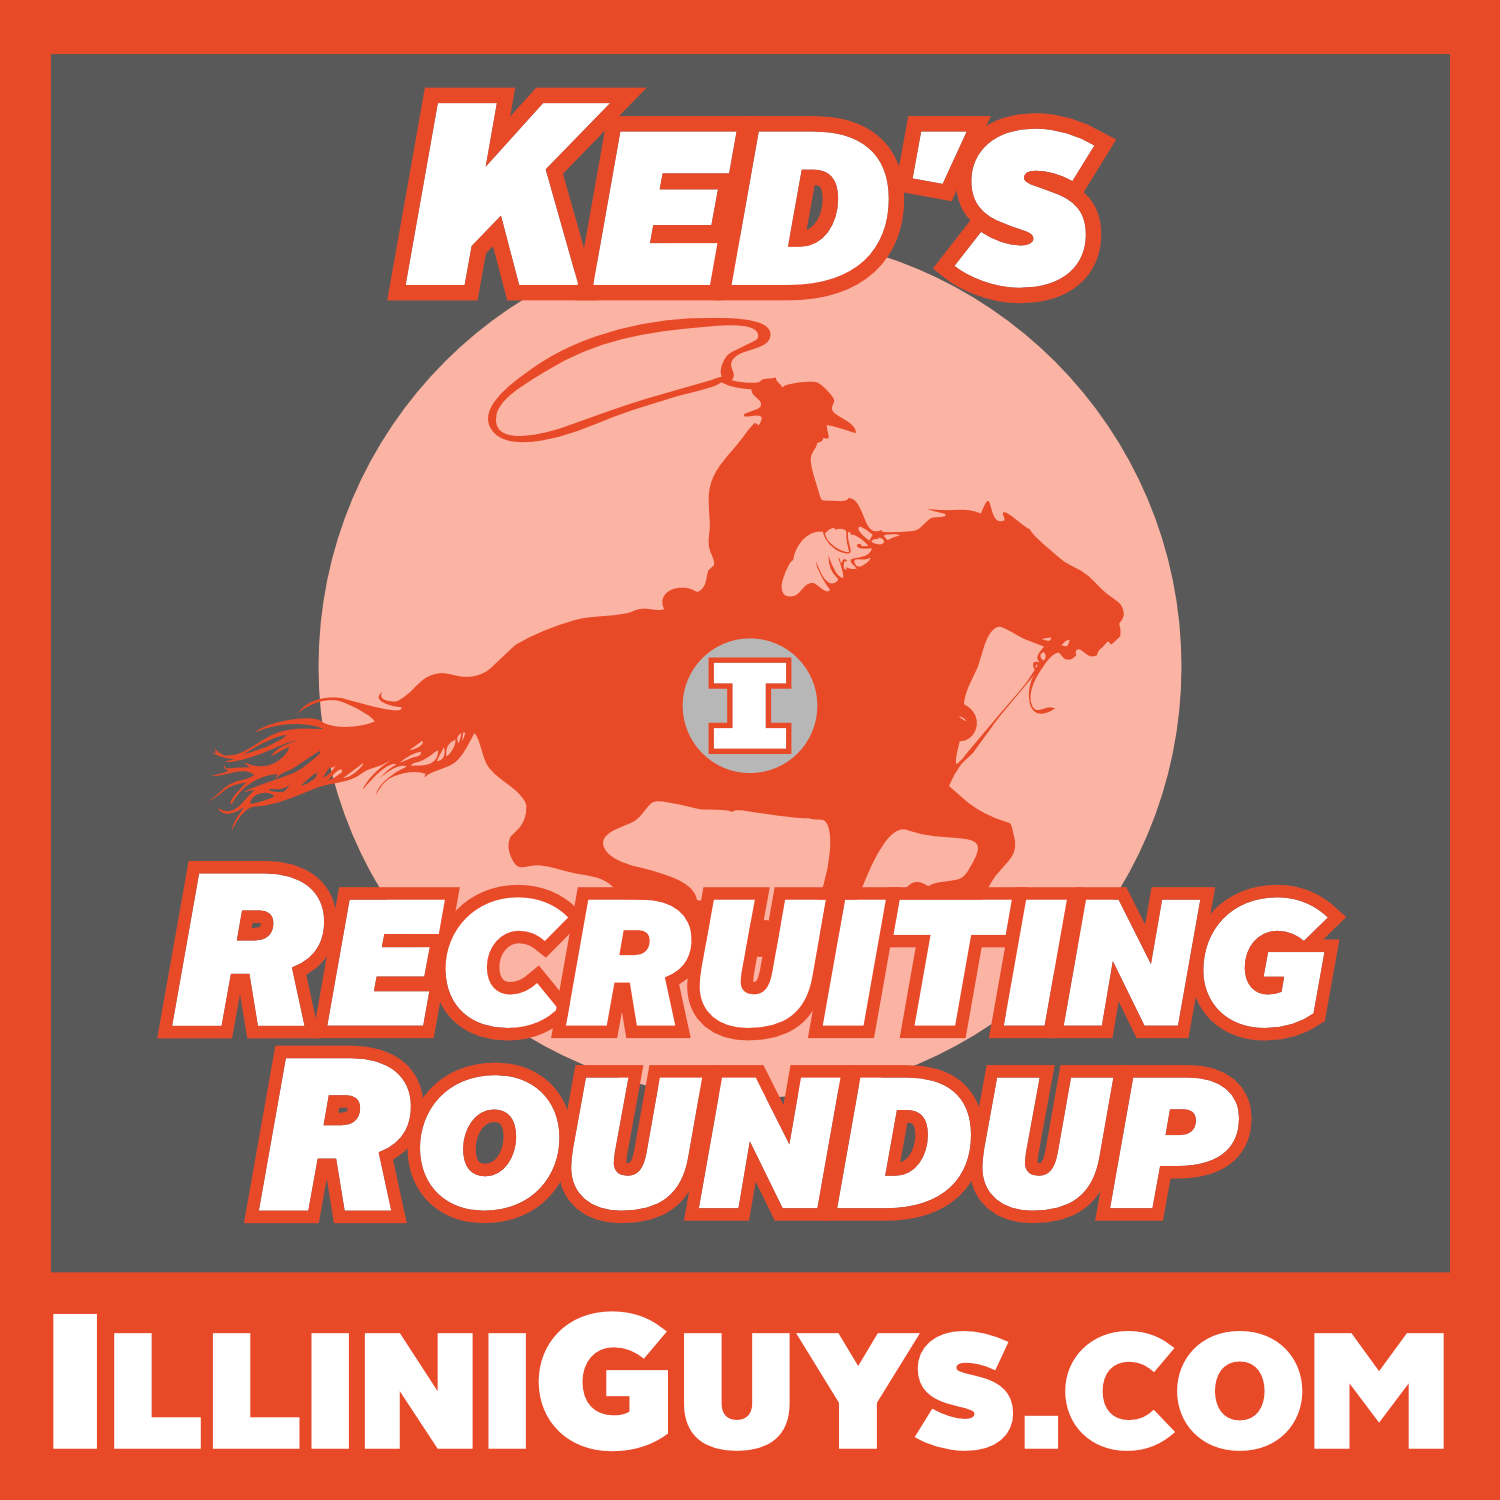 Ked's Recruiting Roundup with Russell Cunningham